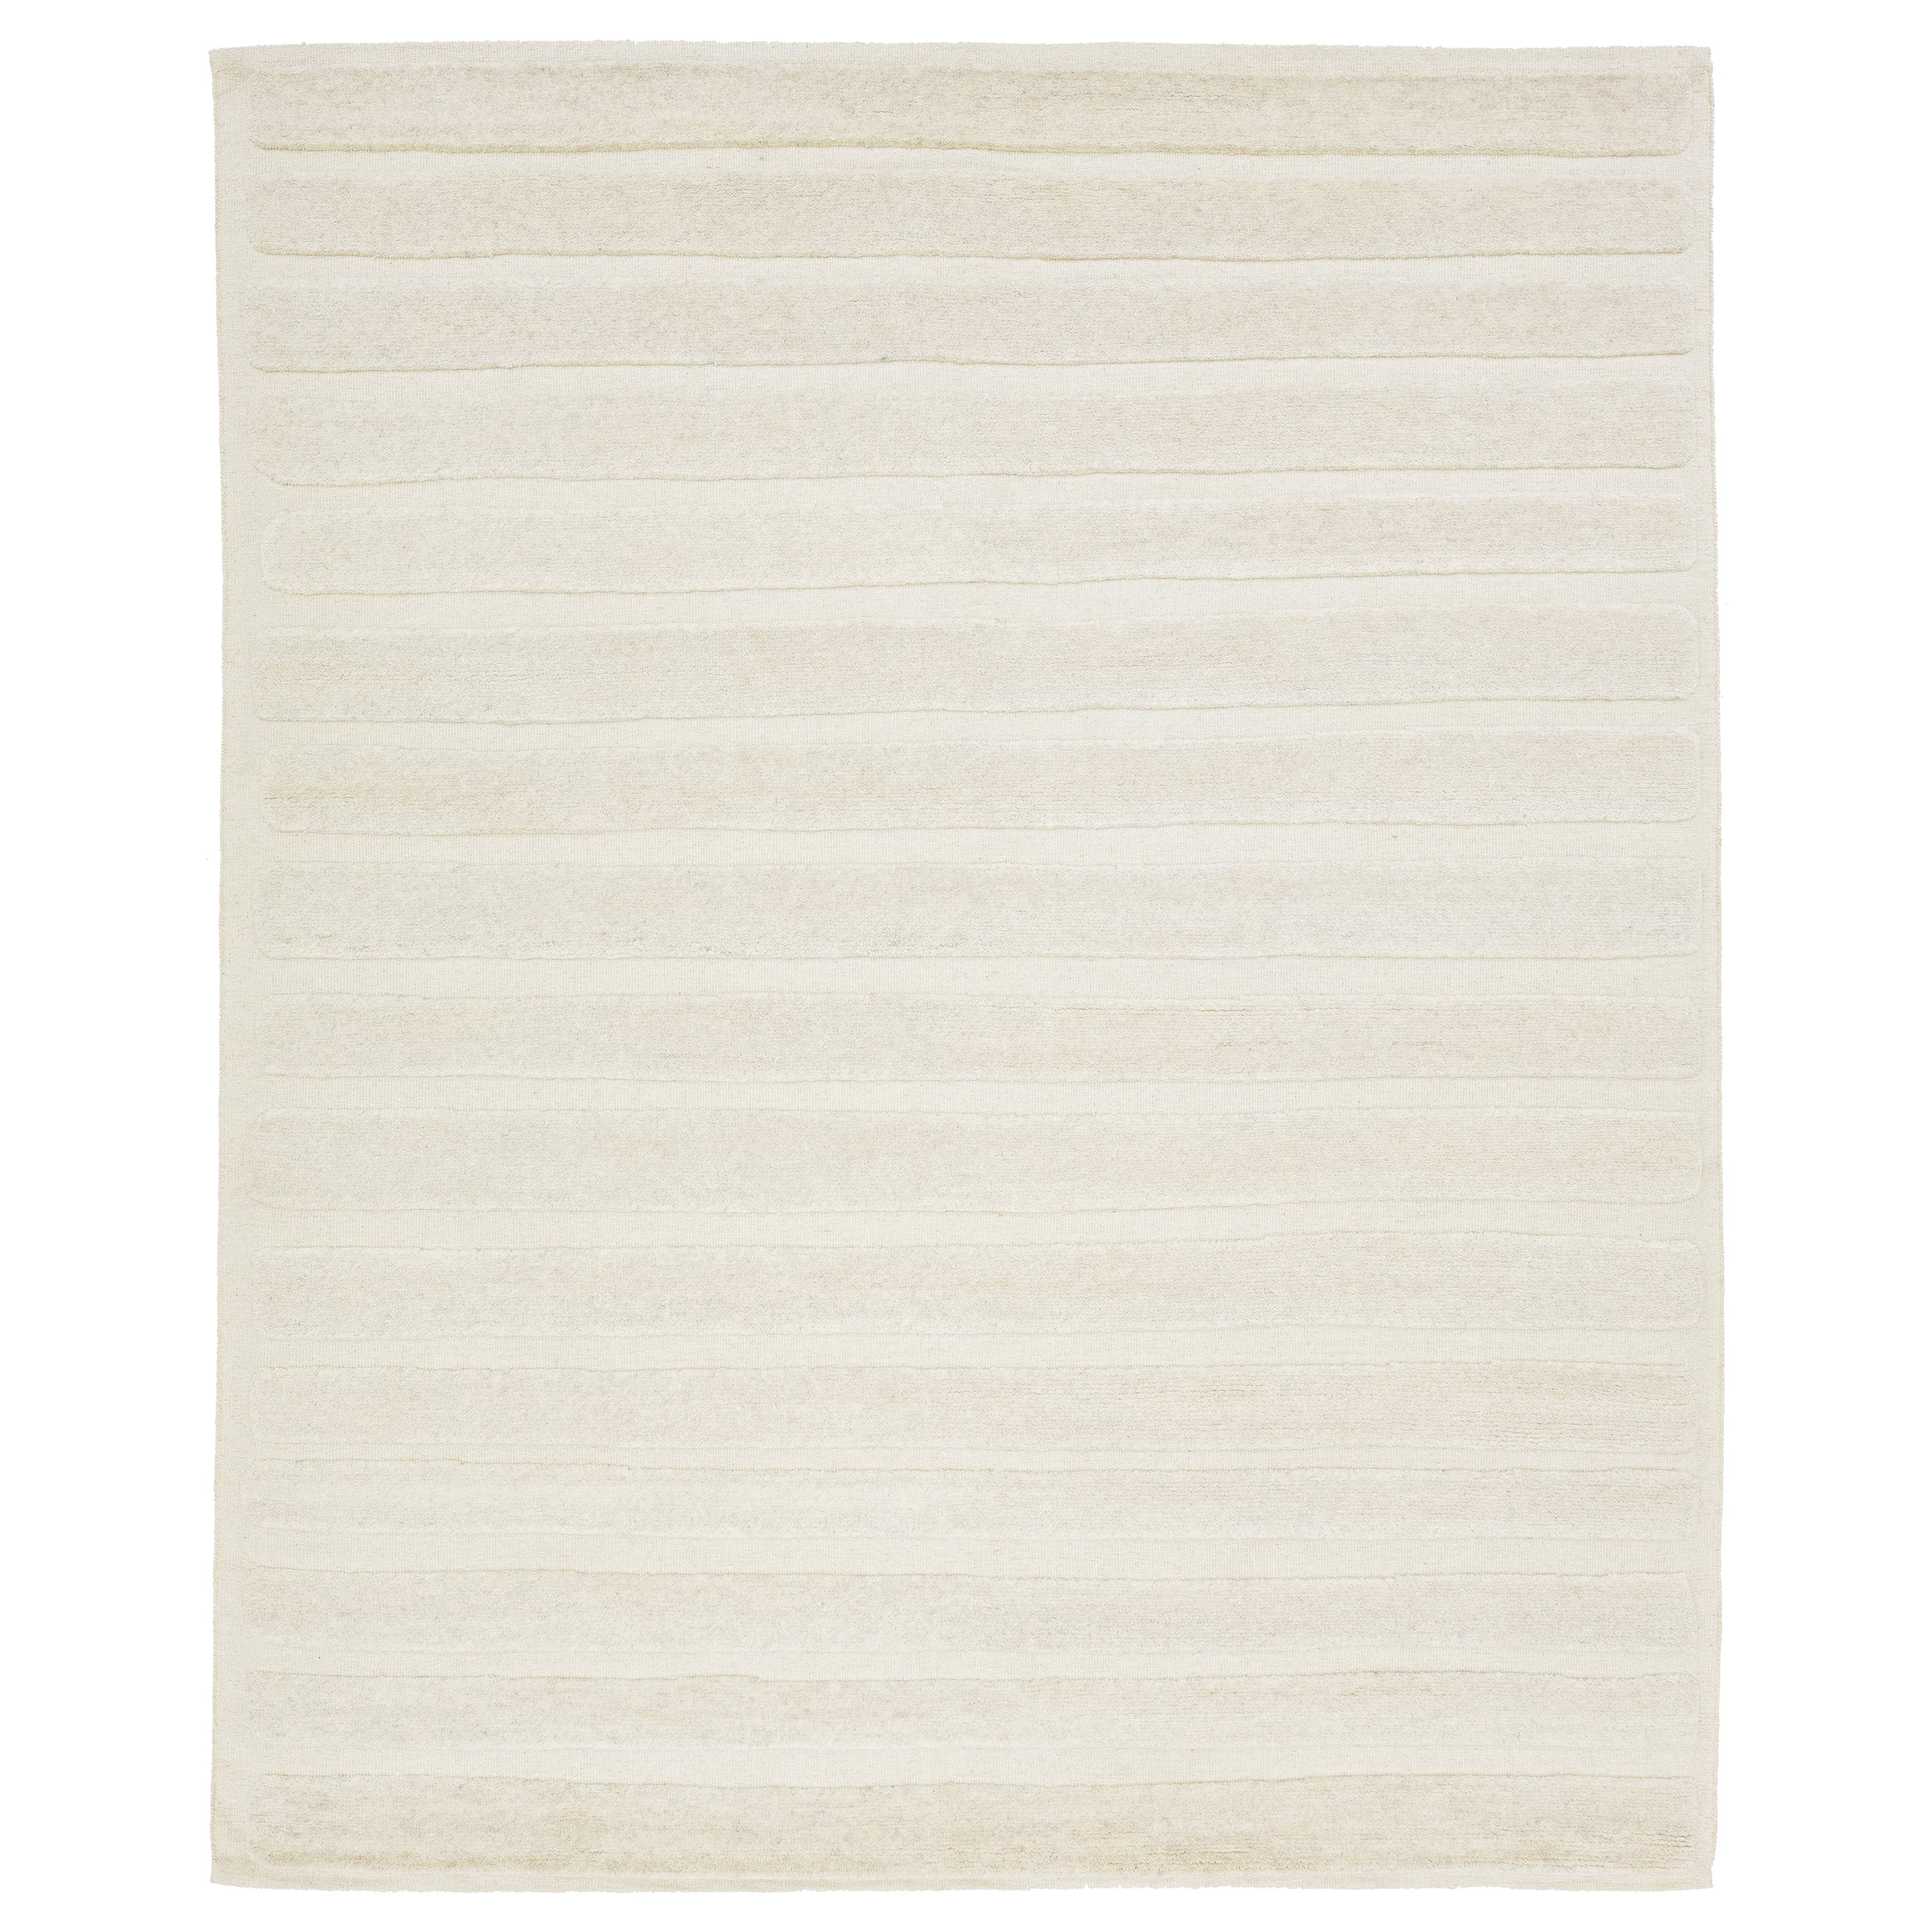 Apadana's Contemporary Ivory Wool Rug With a Striped Moroccan Style For Sale